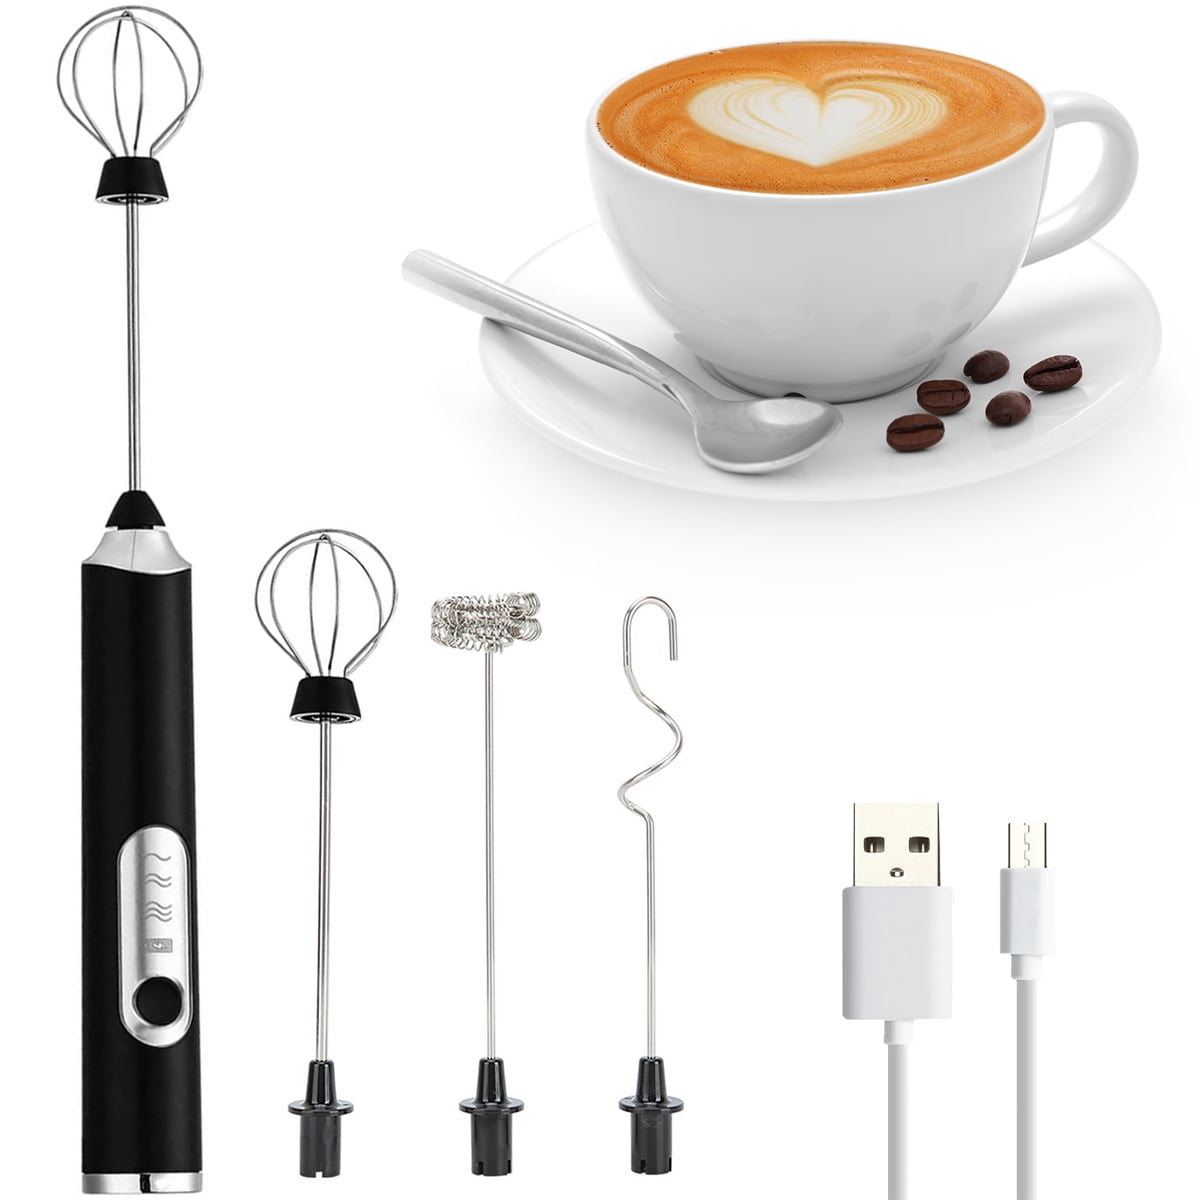 Milk Frother Handheld with 3 Heads,Coffee Whisk Foam Mixer with 3 Speeds,Electric Mini Hand Blender for Latte Cappuccino Hot Chocolate Egg -